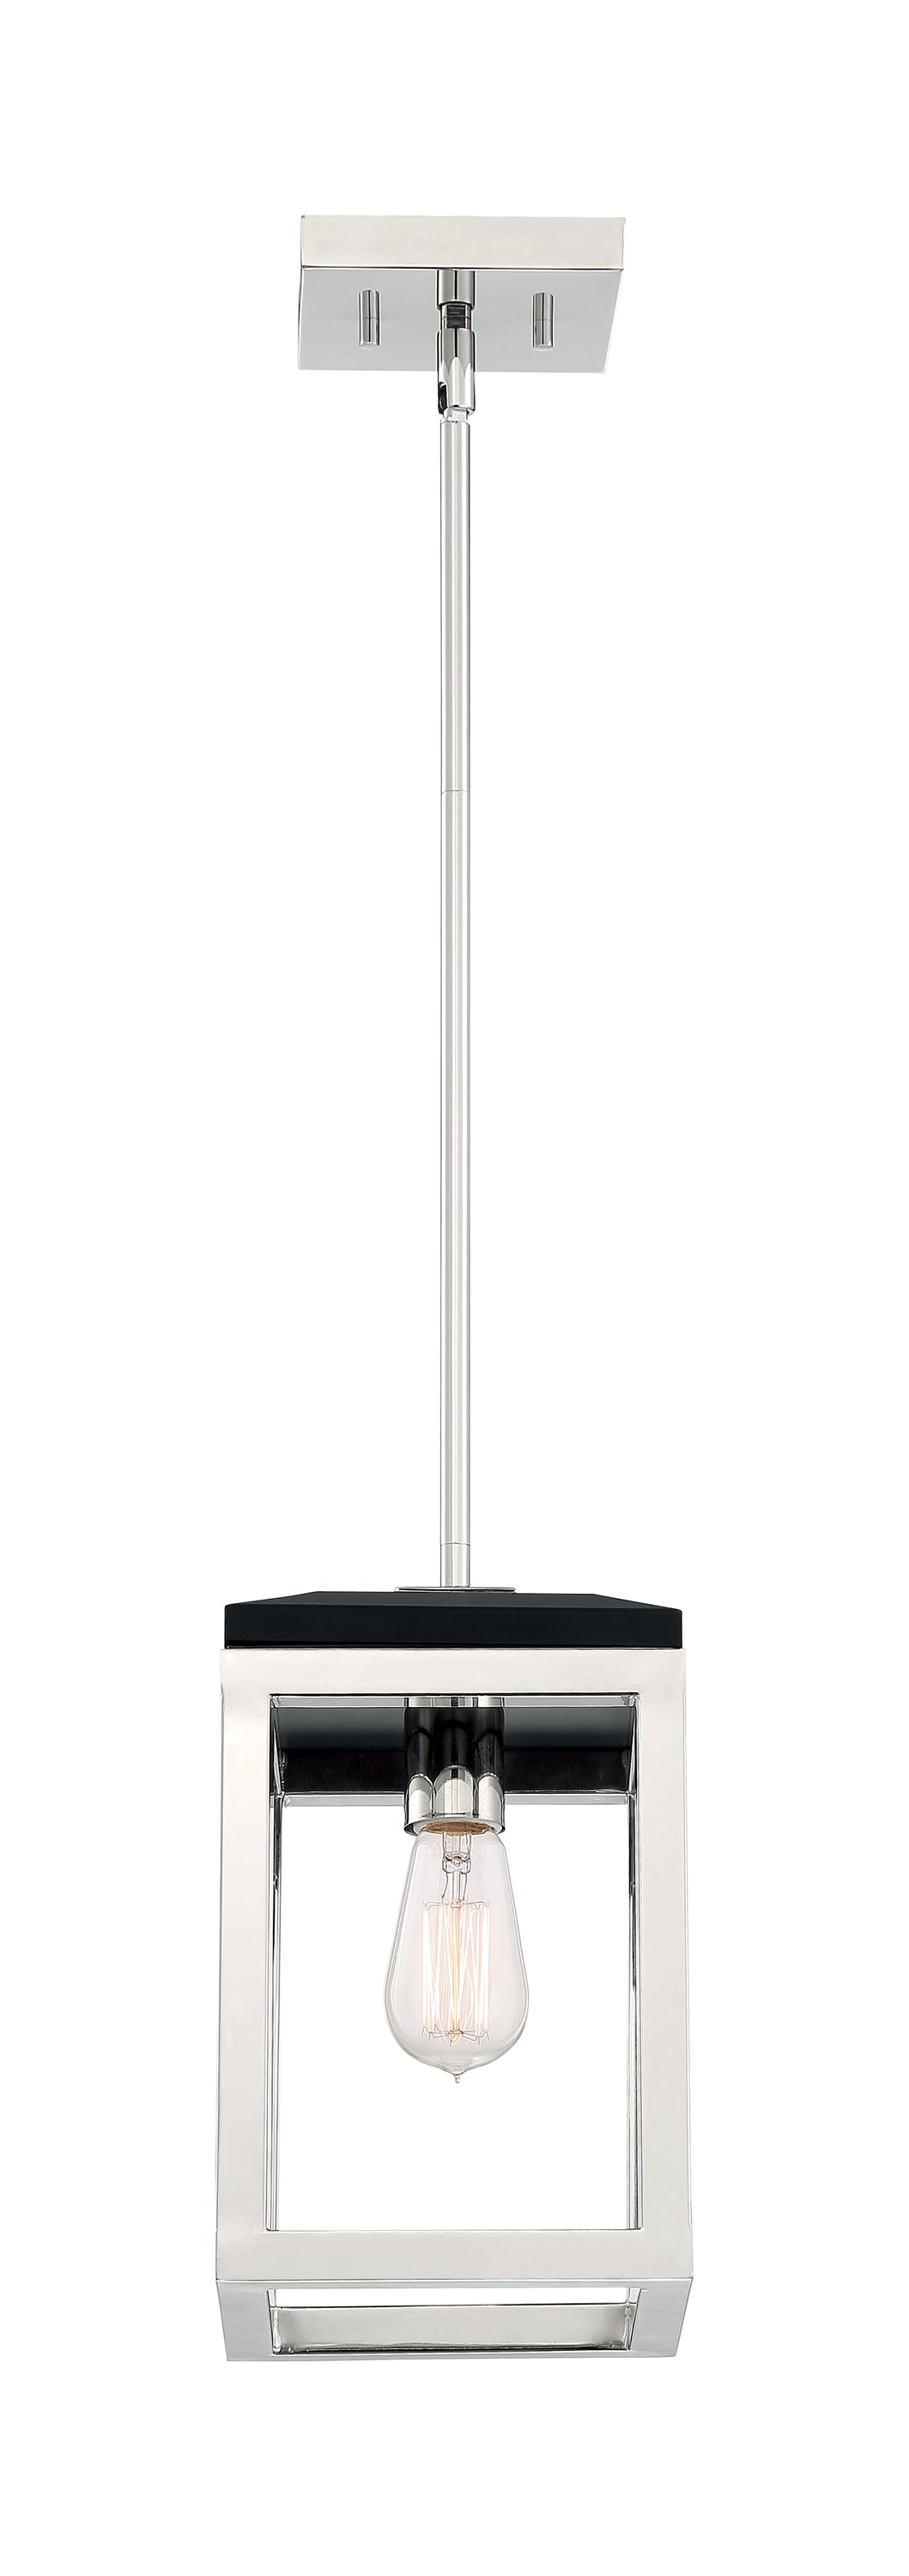 Cakewalk - 1 Light Pendant with Polished Nickel and Black Accents Finish